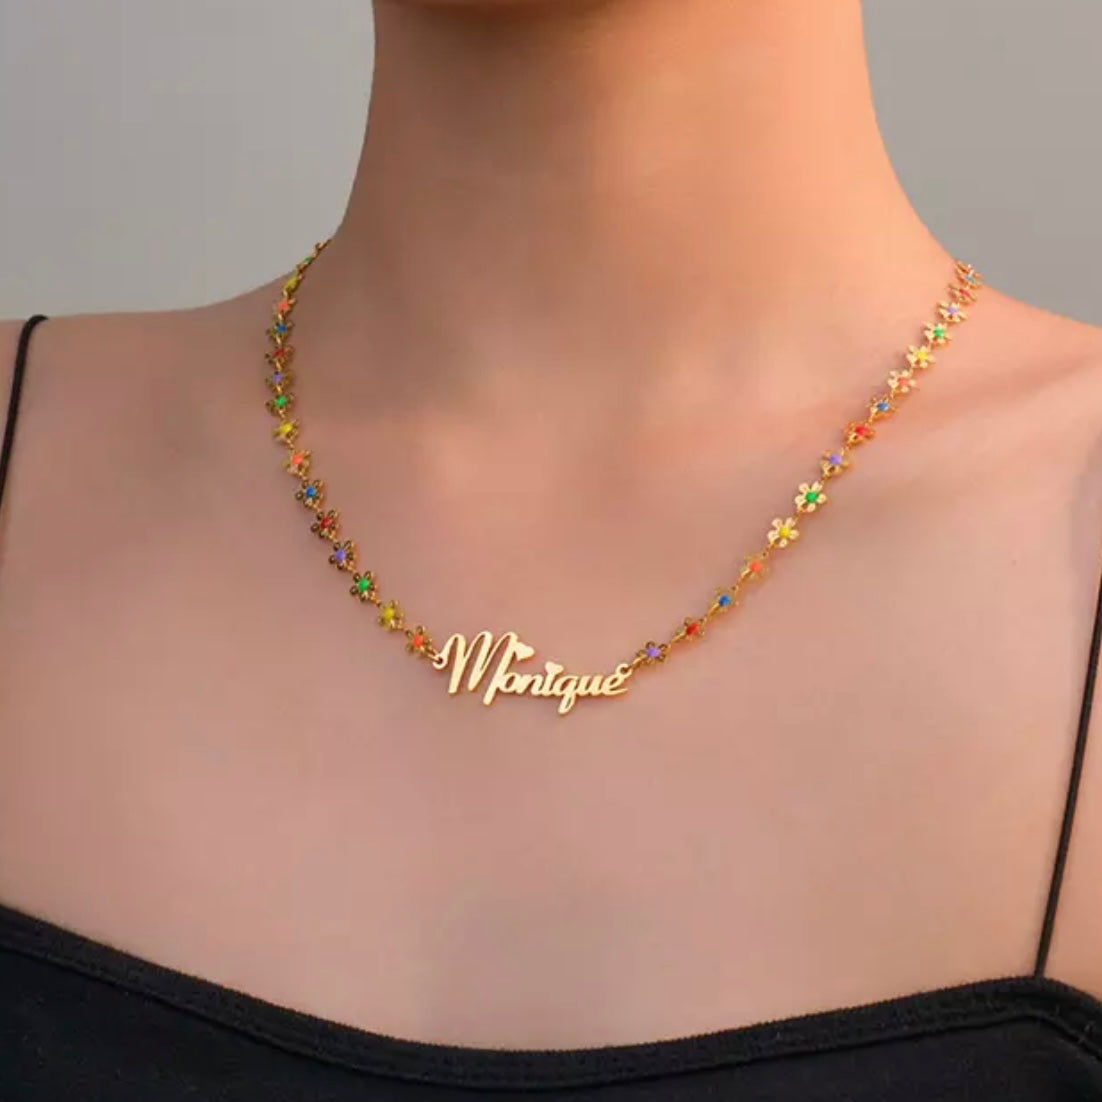 14k Gold Stainless Steel Multi Color Multi Dementional Flower Necklace w/ Custom Butterfly Wing Name Plate Pendant